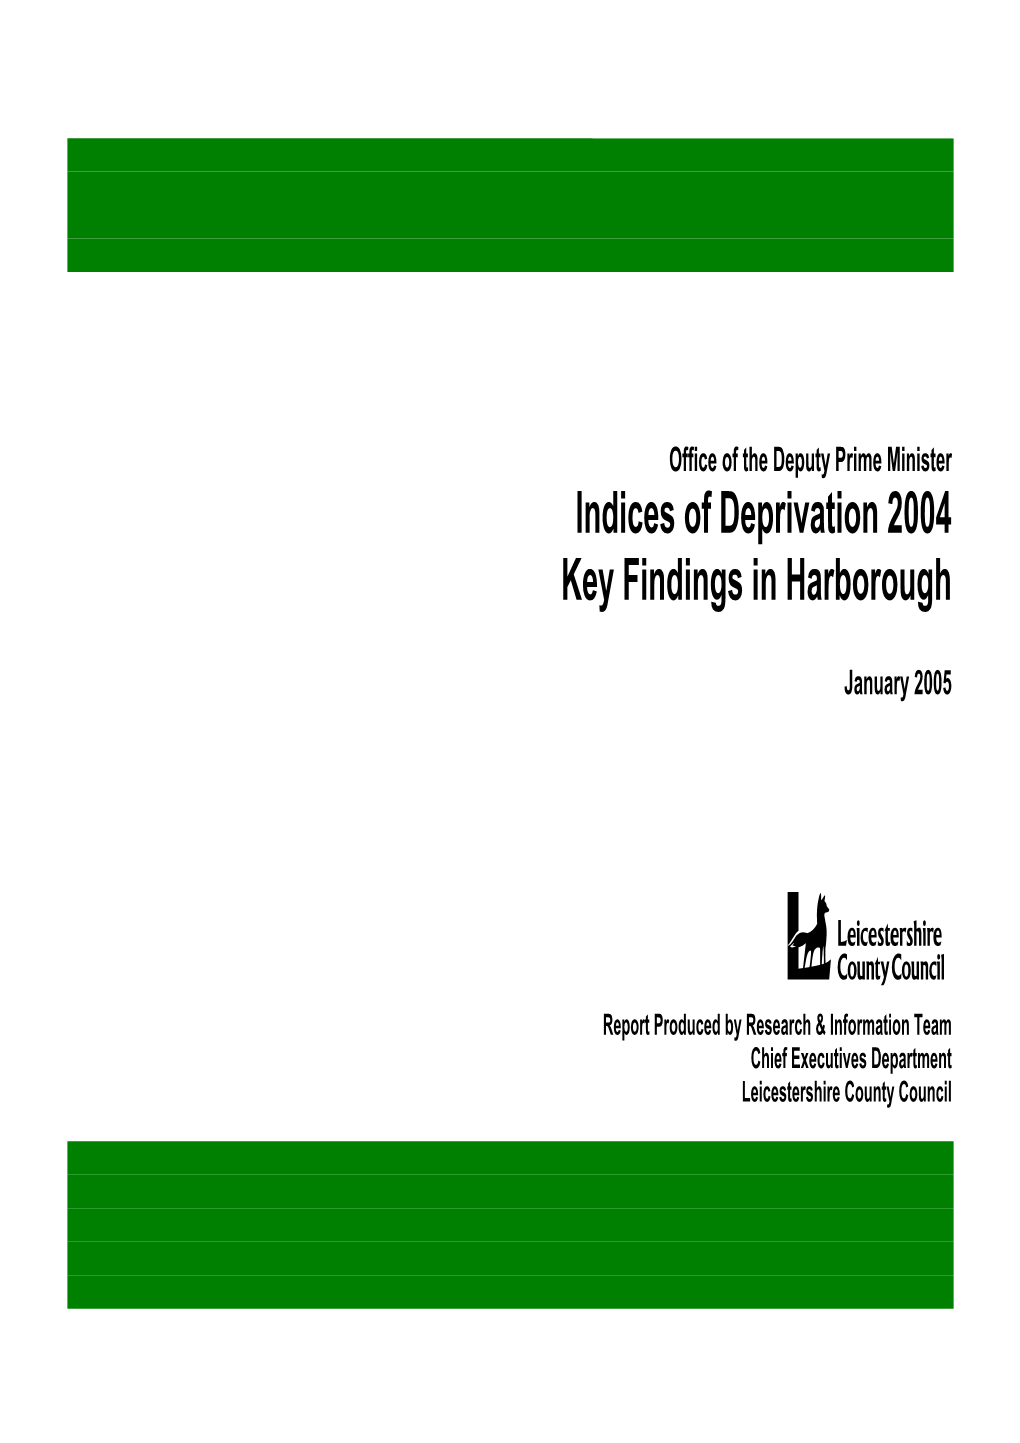 Indices of Deprivation 2004 Key Findings in Harborough